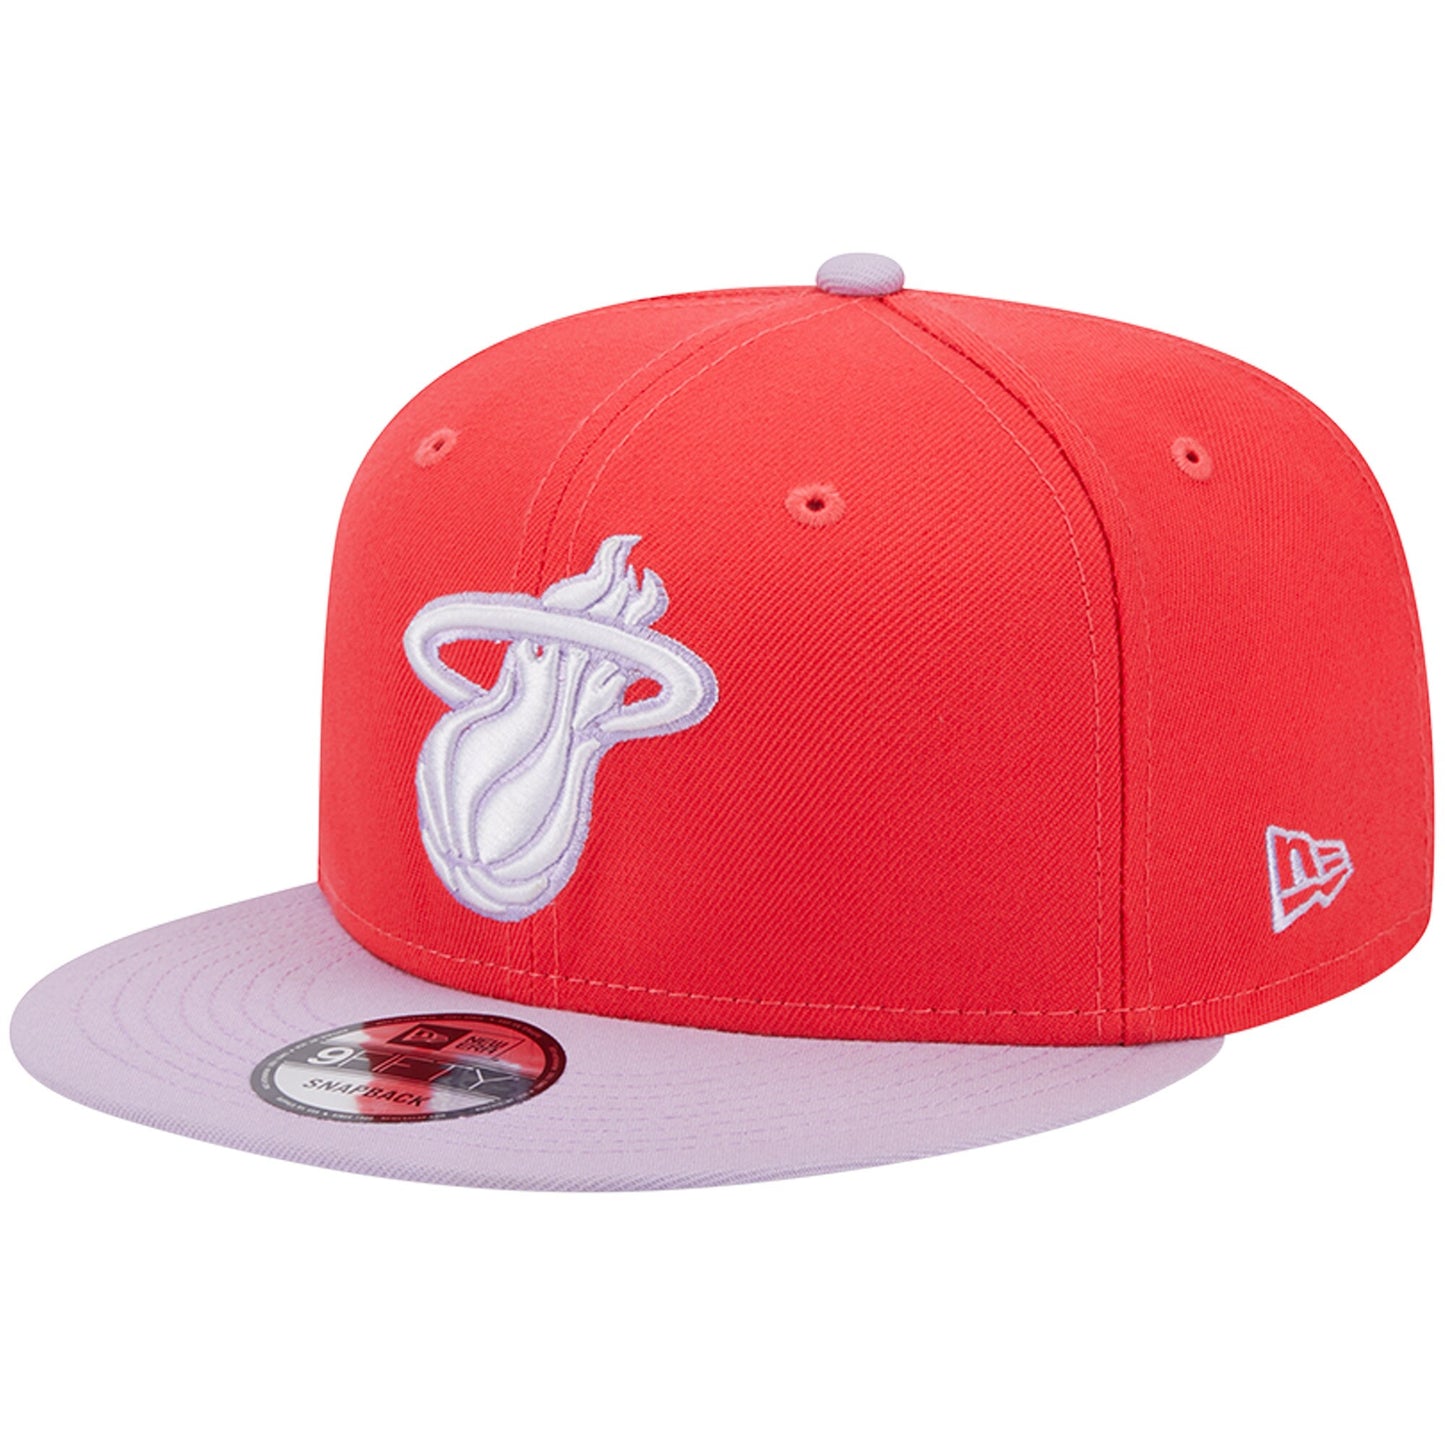 Miami Heat New Era 2-Tone Color Pack 9FIFTY Snapback Hat - Red/Lavender